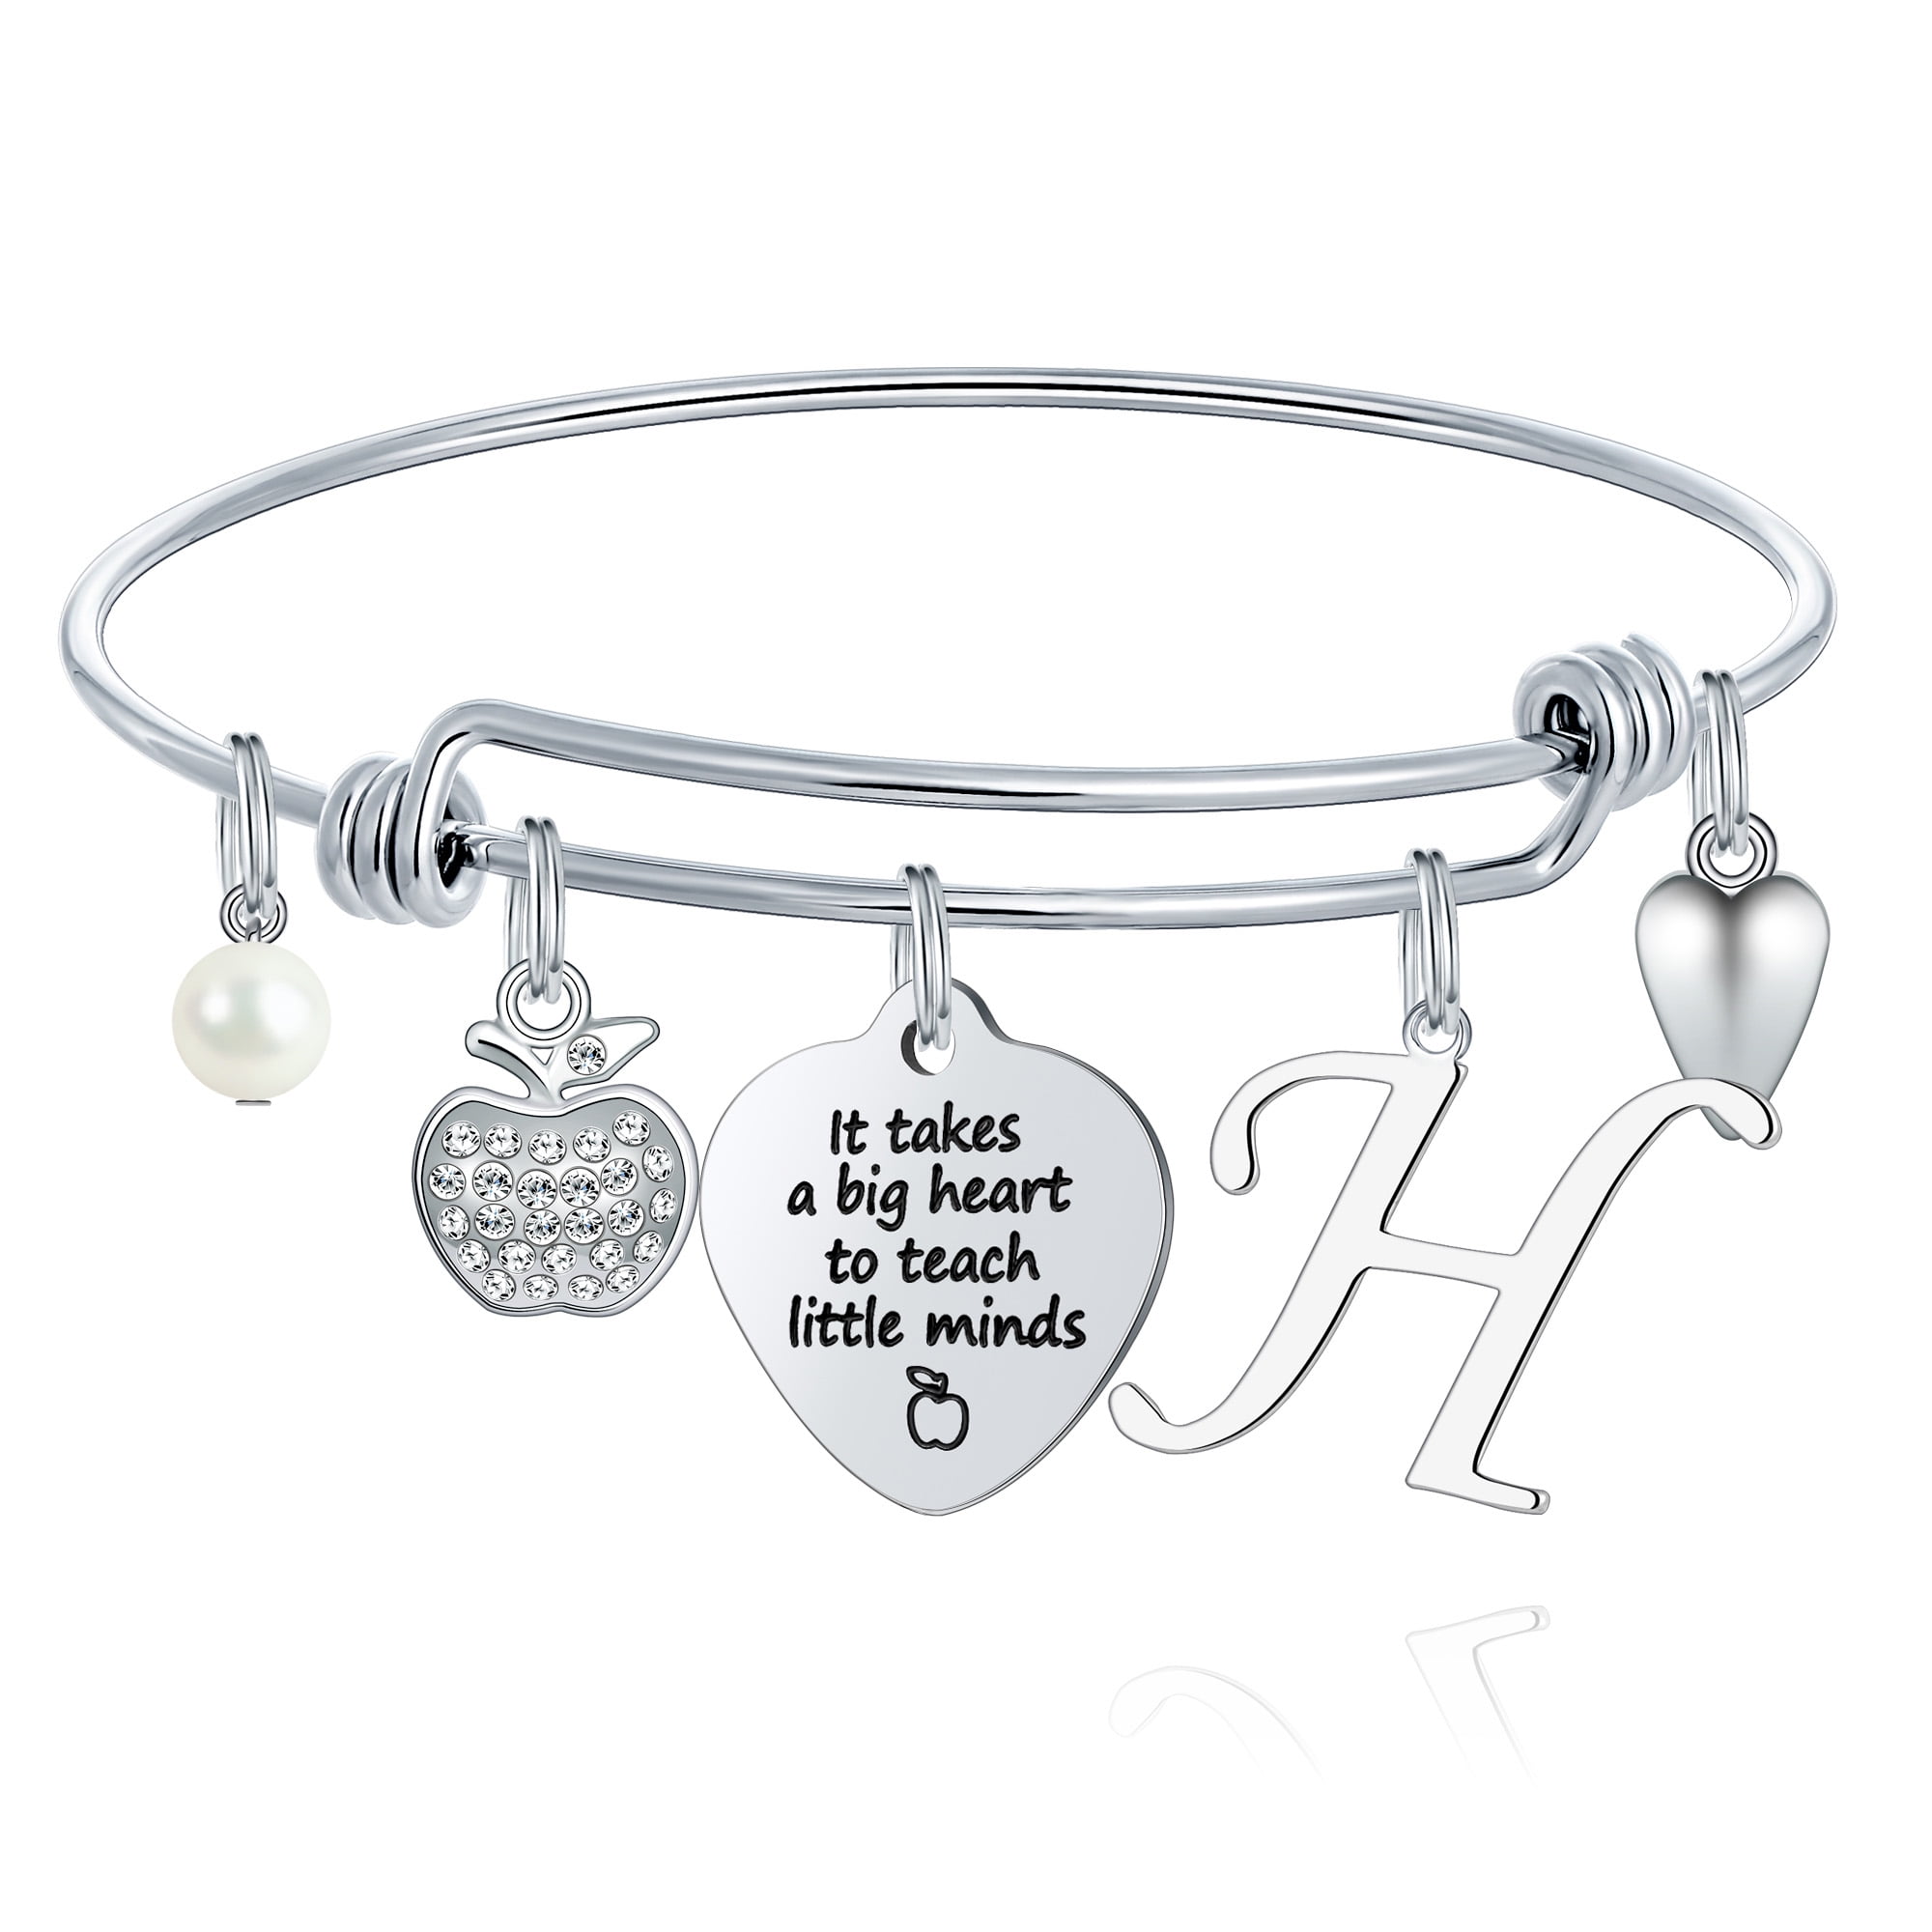 Schoolteacher Charm Bracelet Personalized with Enameled Apple Charms